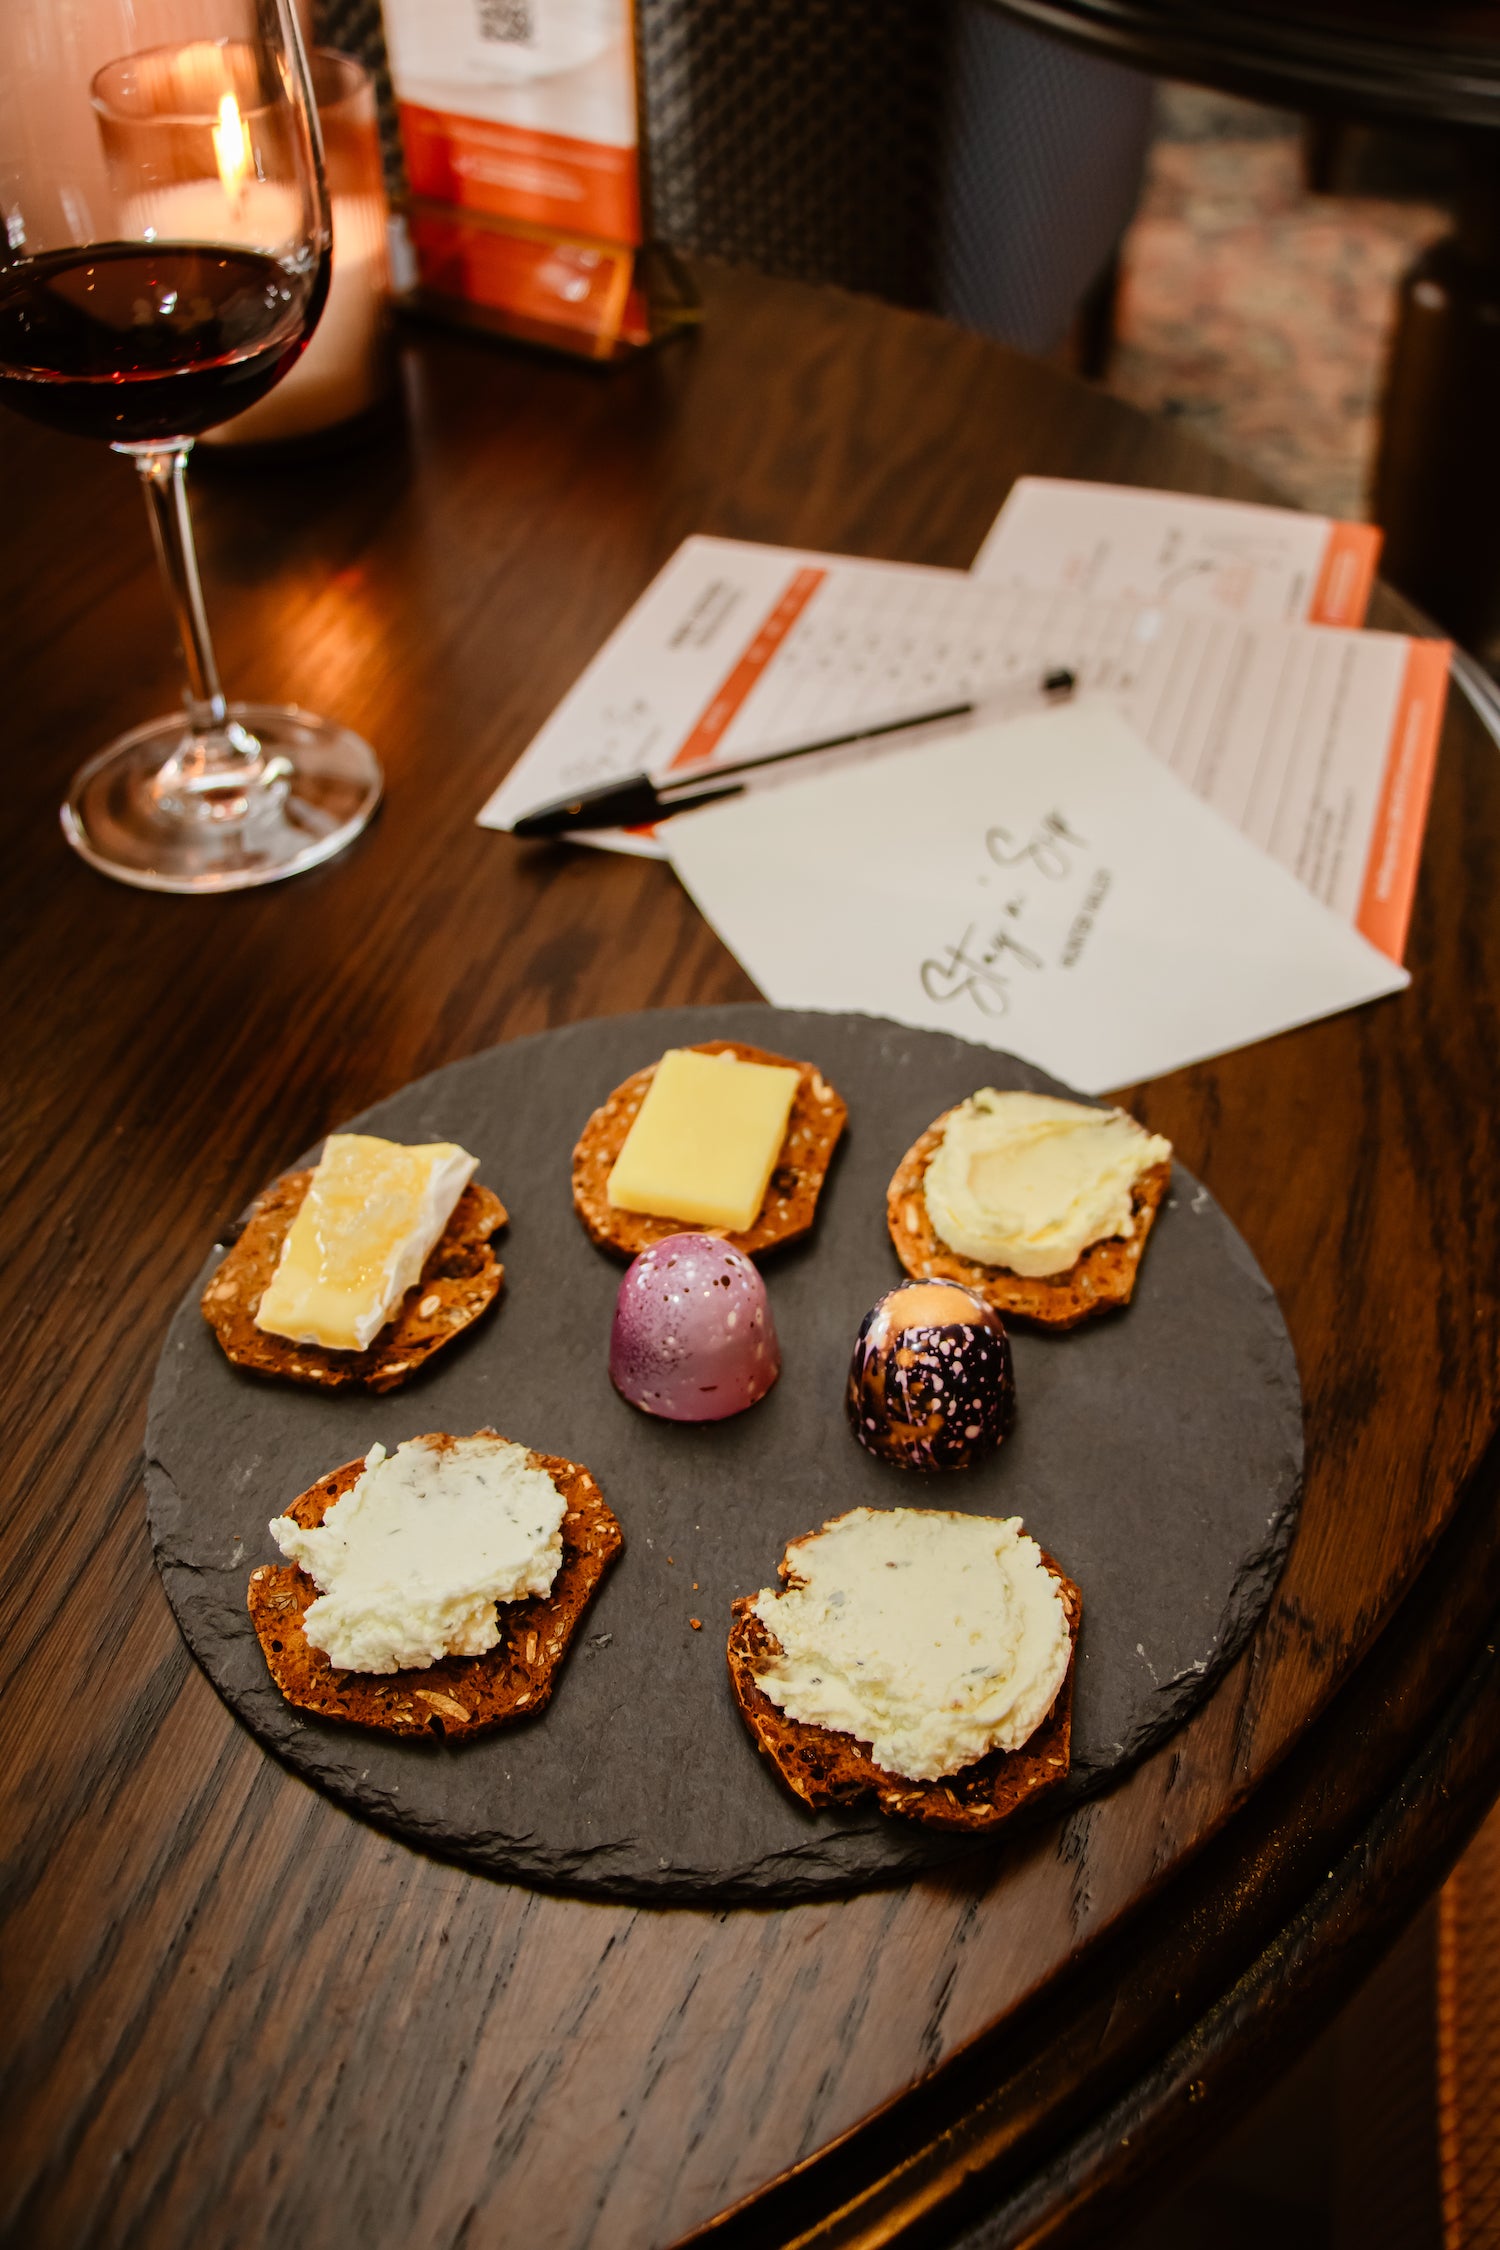 Slate with five different cheeses on gourmet crackers with two hand painted chocolate bon bons.